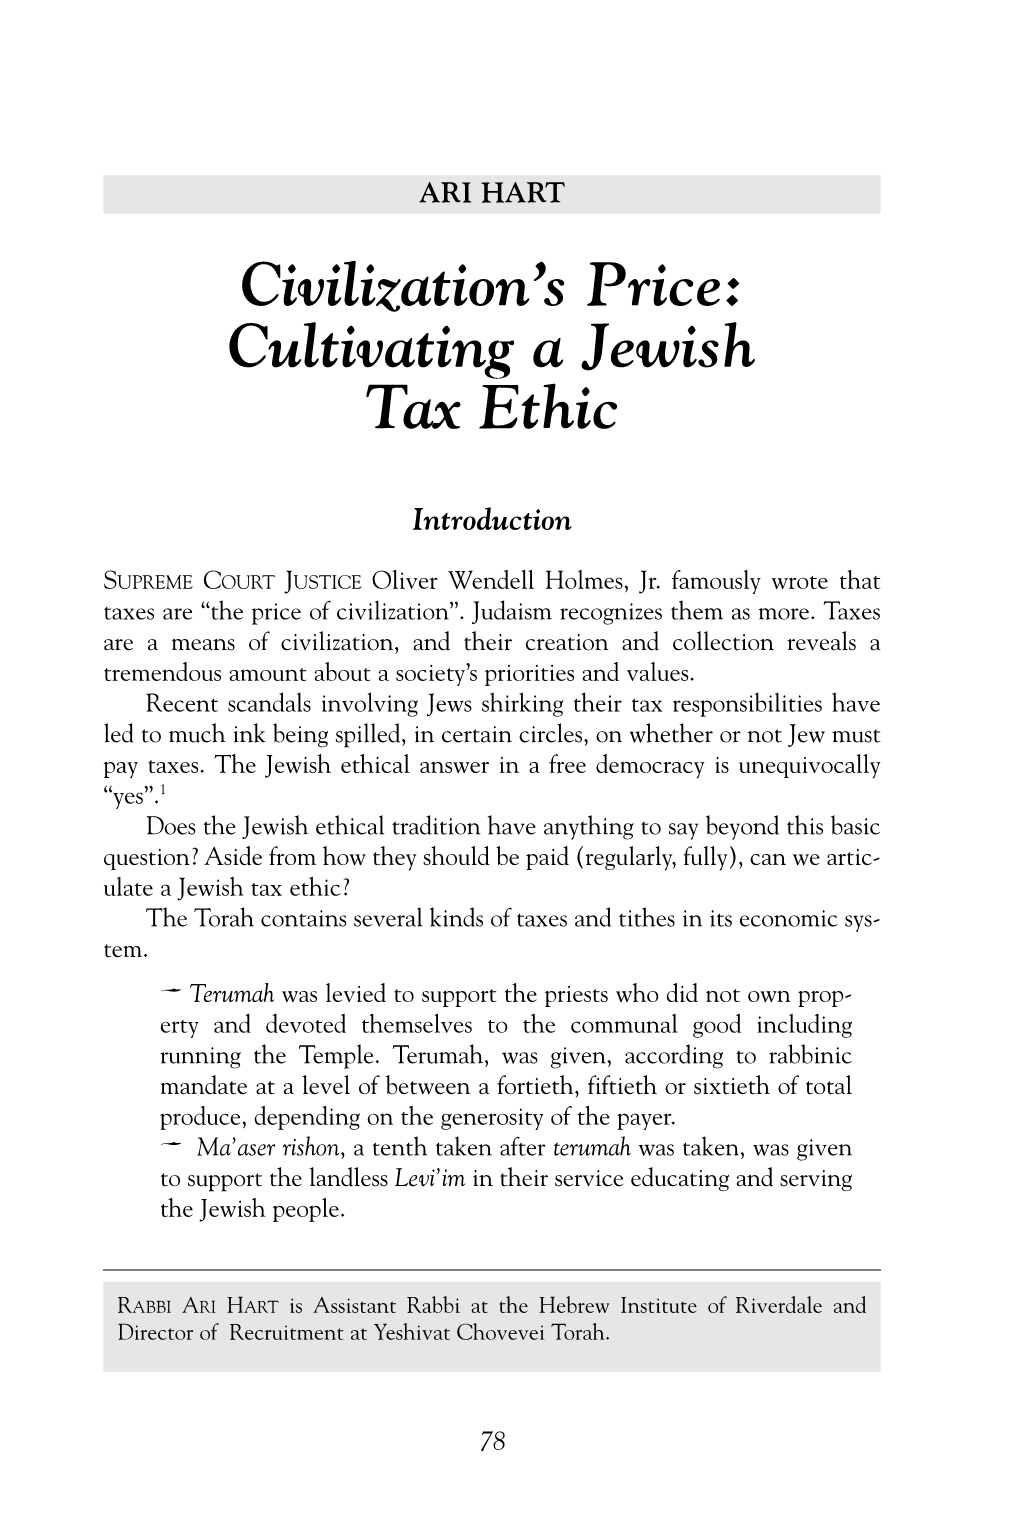 Cultivating a Jewish Tax Ethic